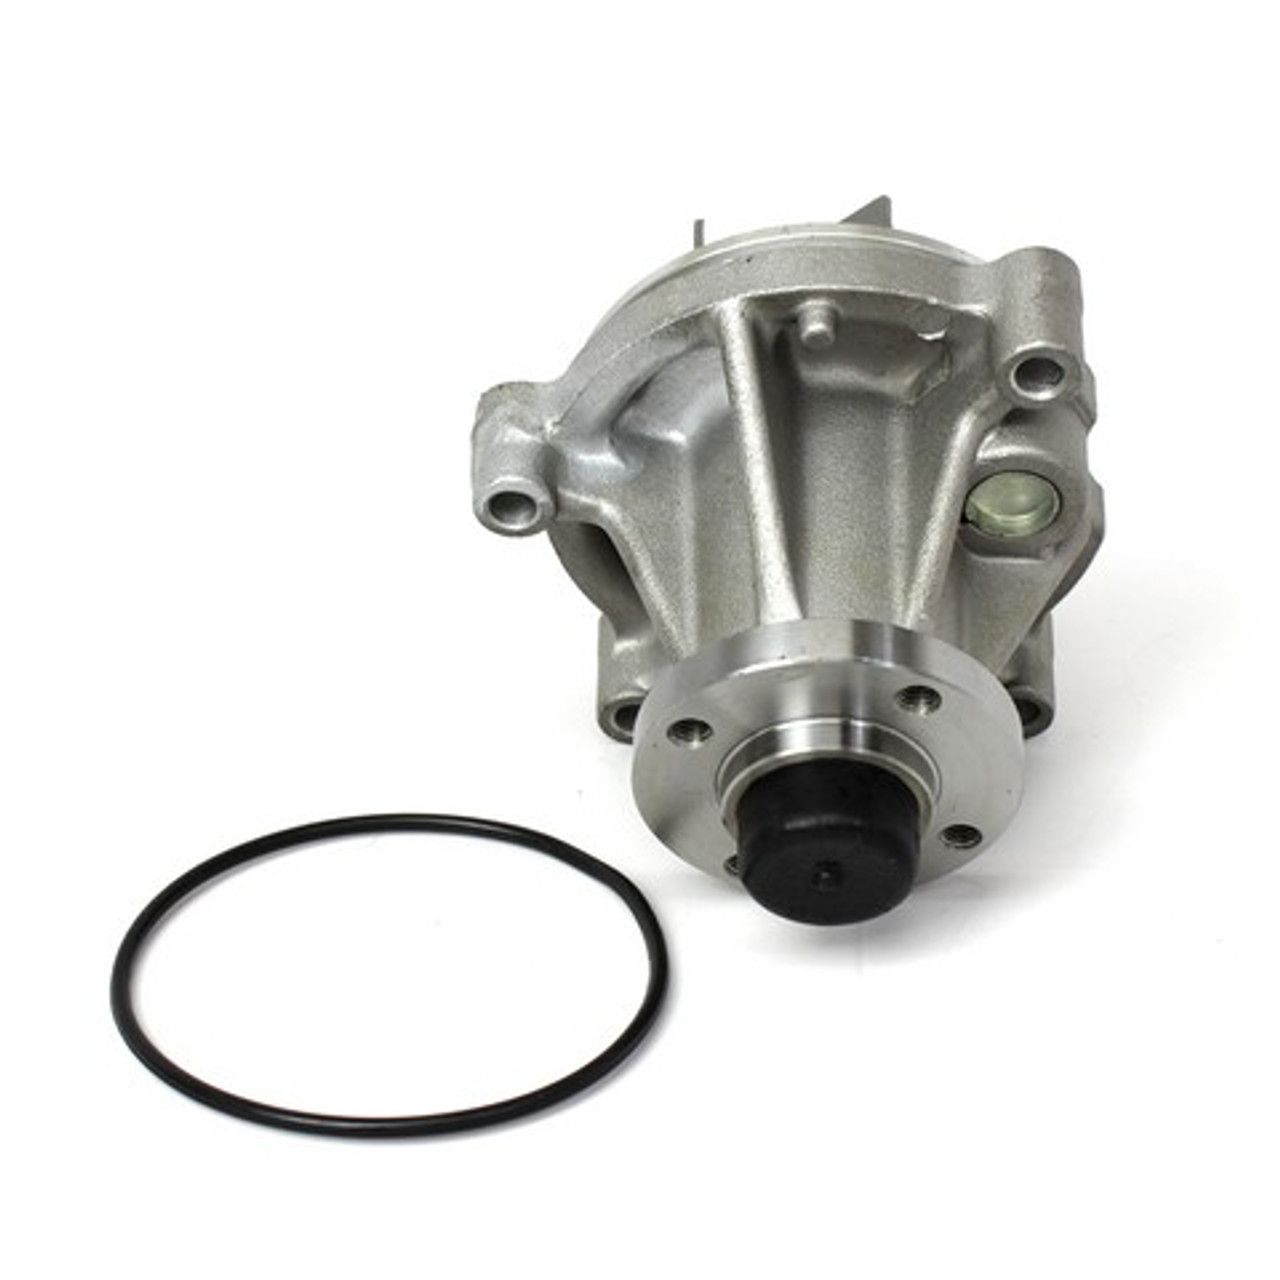 Water Pump 4.6L 2012 Ford E-150 - WP4170.25